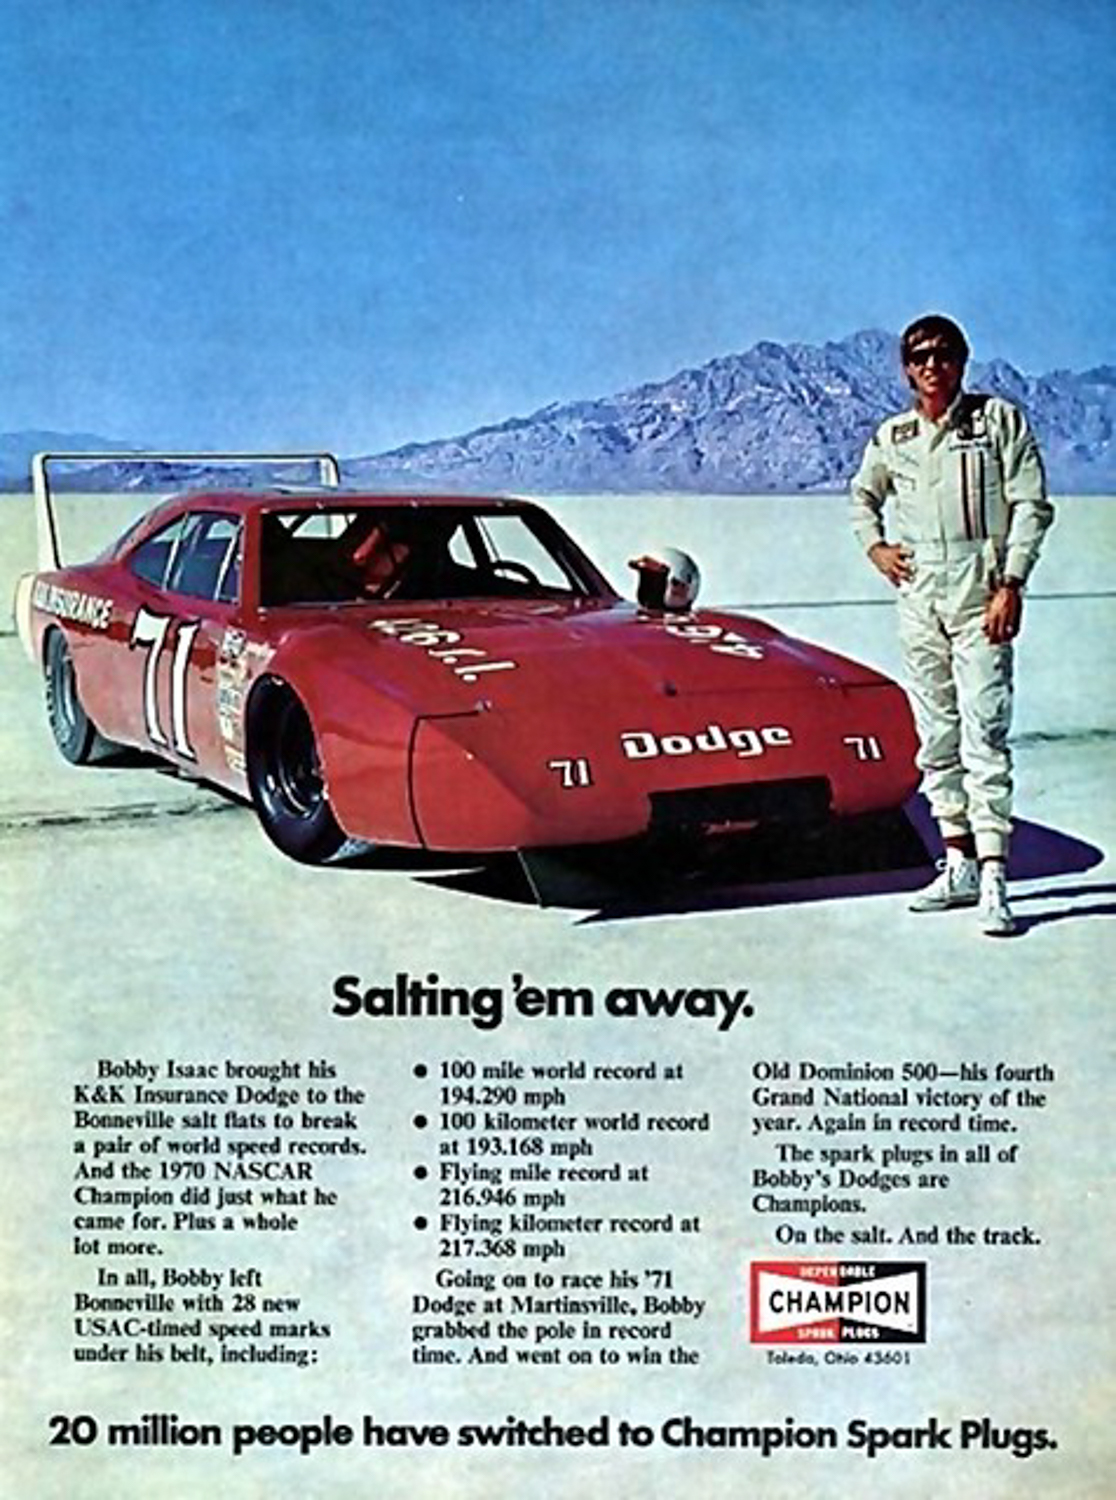 201.104 mph at Talladega and 28 land speed records at Bonneville. 